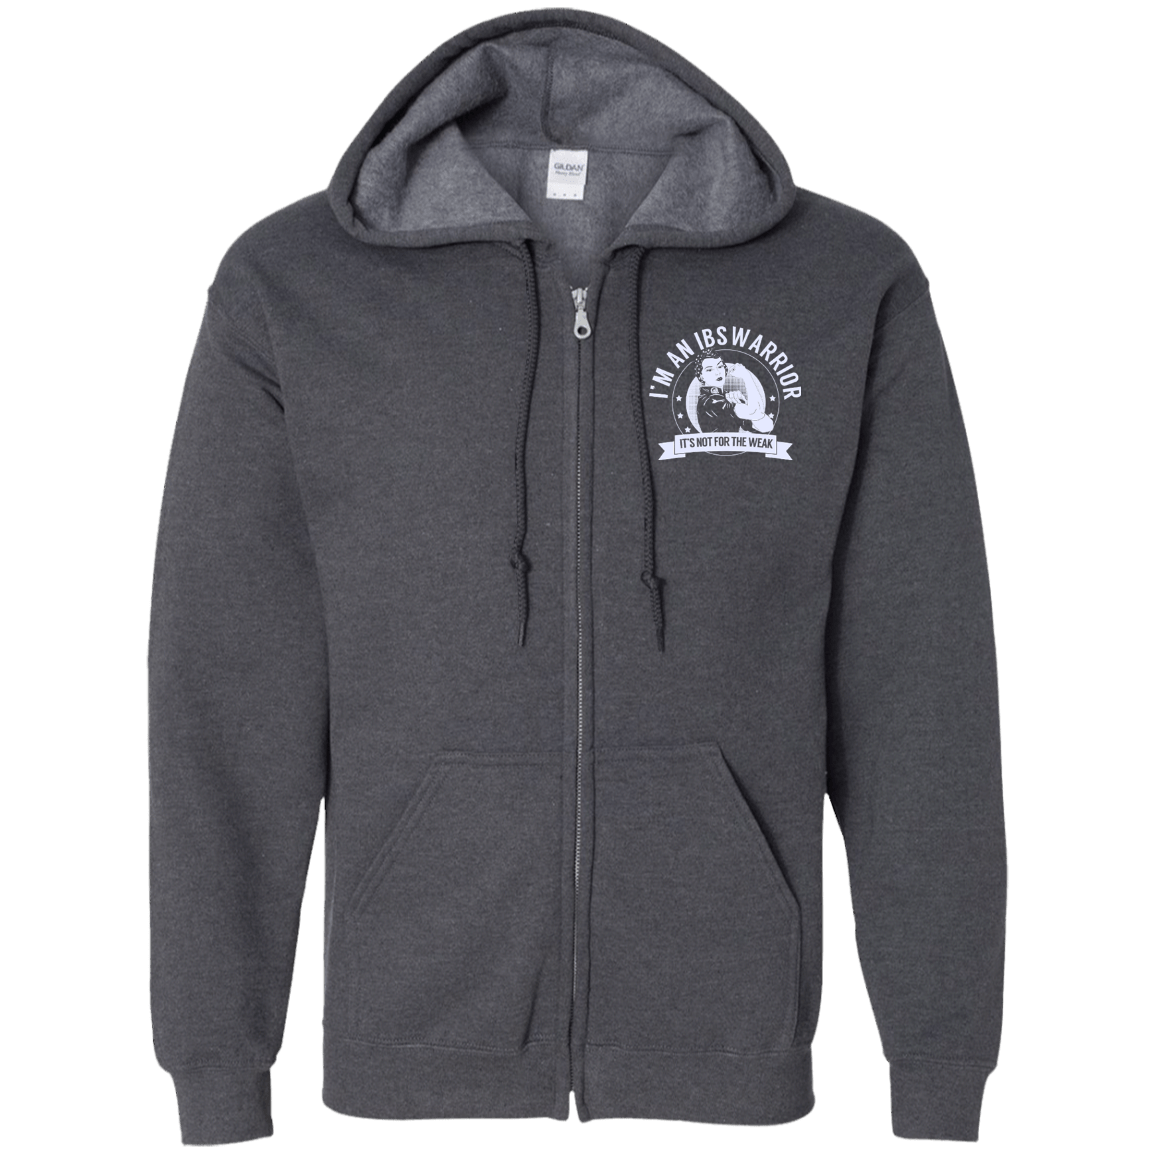 Irritable Bowel Syndrome - IBS Warrior NFTW Zip Up Hooded Sweatshirt - The Unchargeables